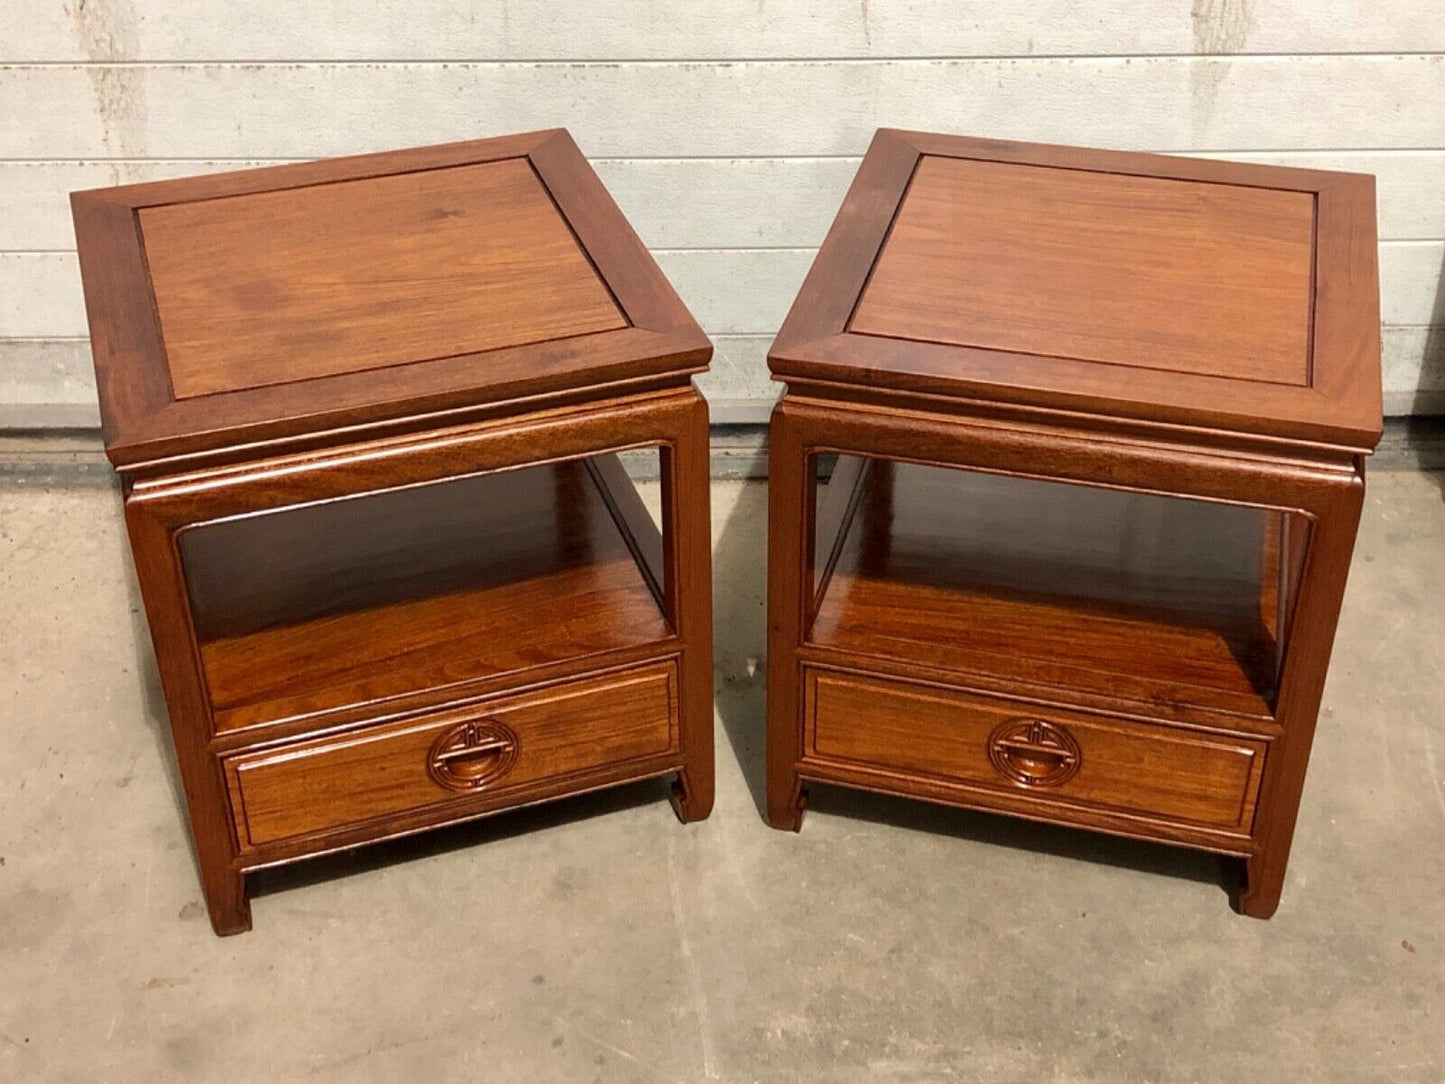 000736....Handsome Pair Of Chinese Rosewood Bedside Tables / Lamp Tables